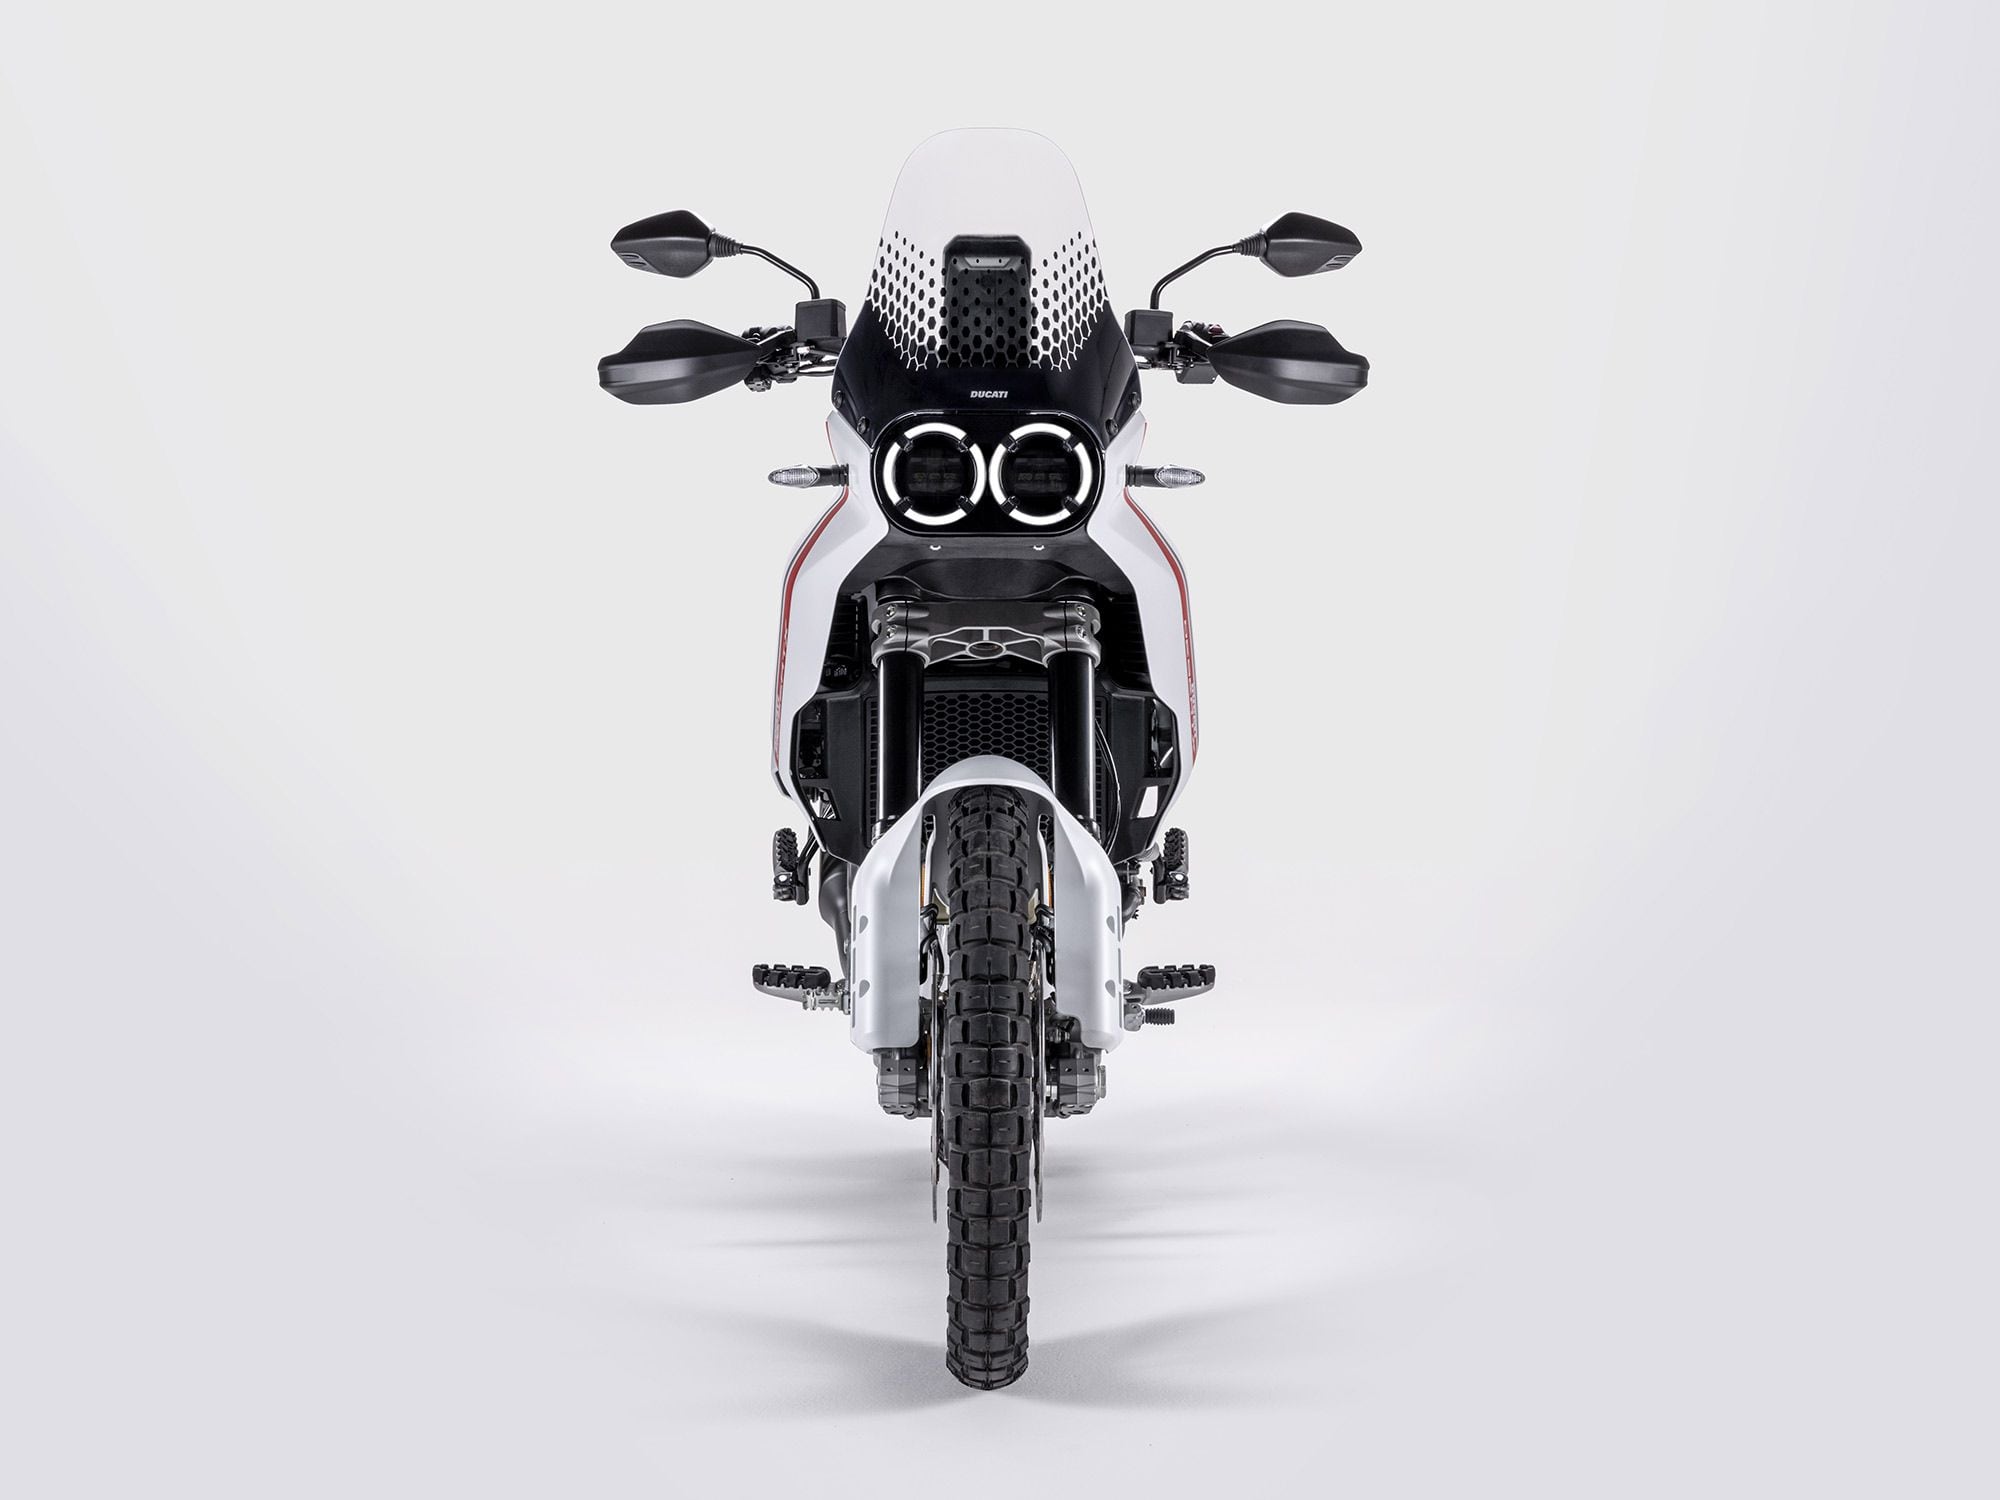 Squint your eyes and you’re looking at a Dakar racer. Styling is retro-modern and yet looks very Ducati.